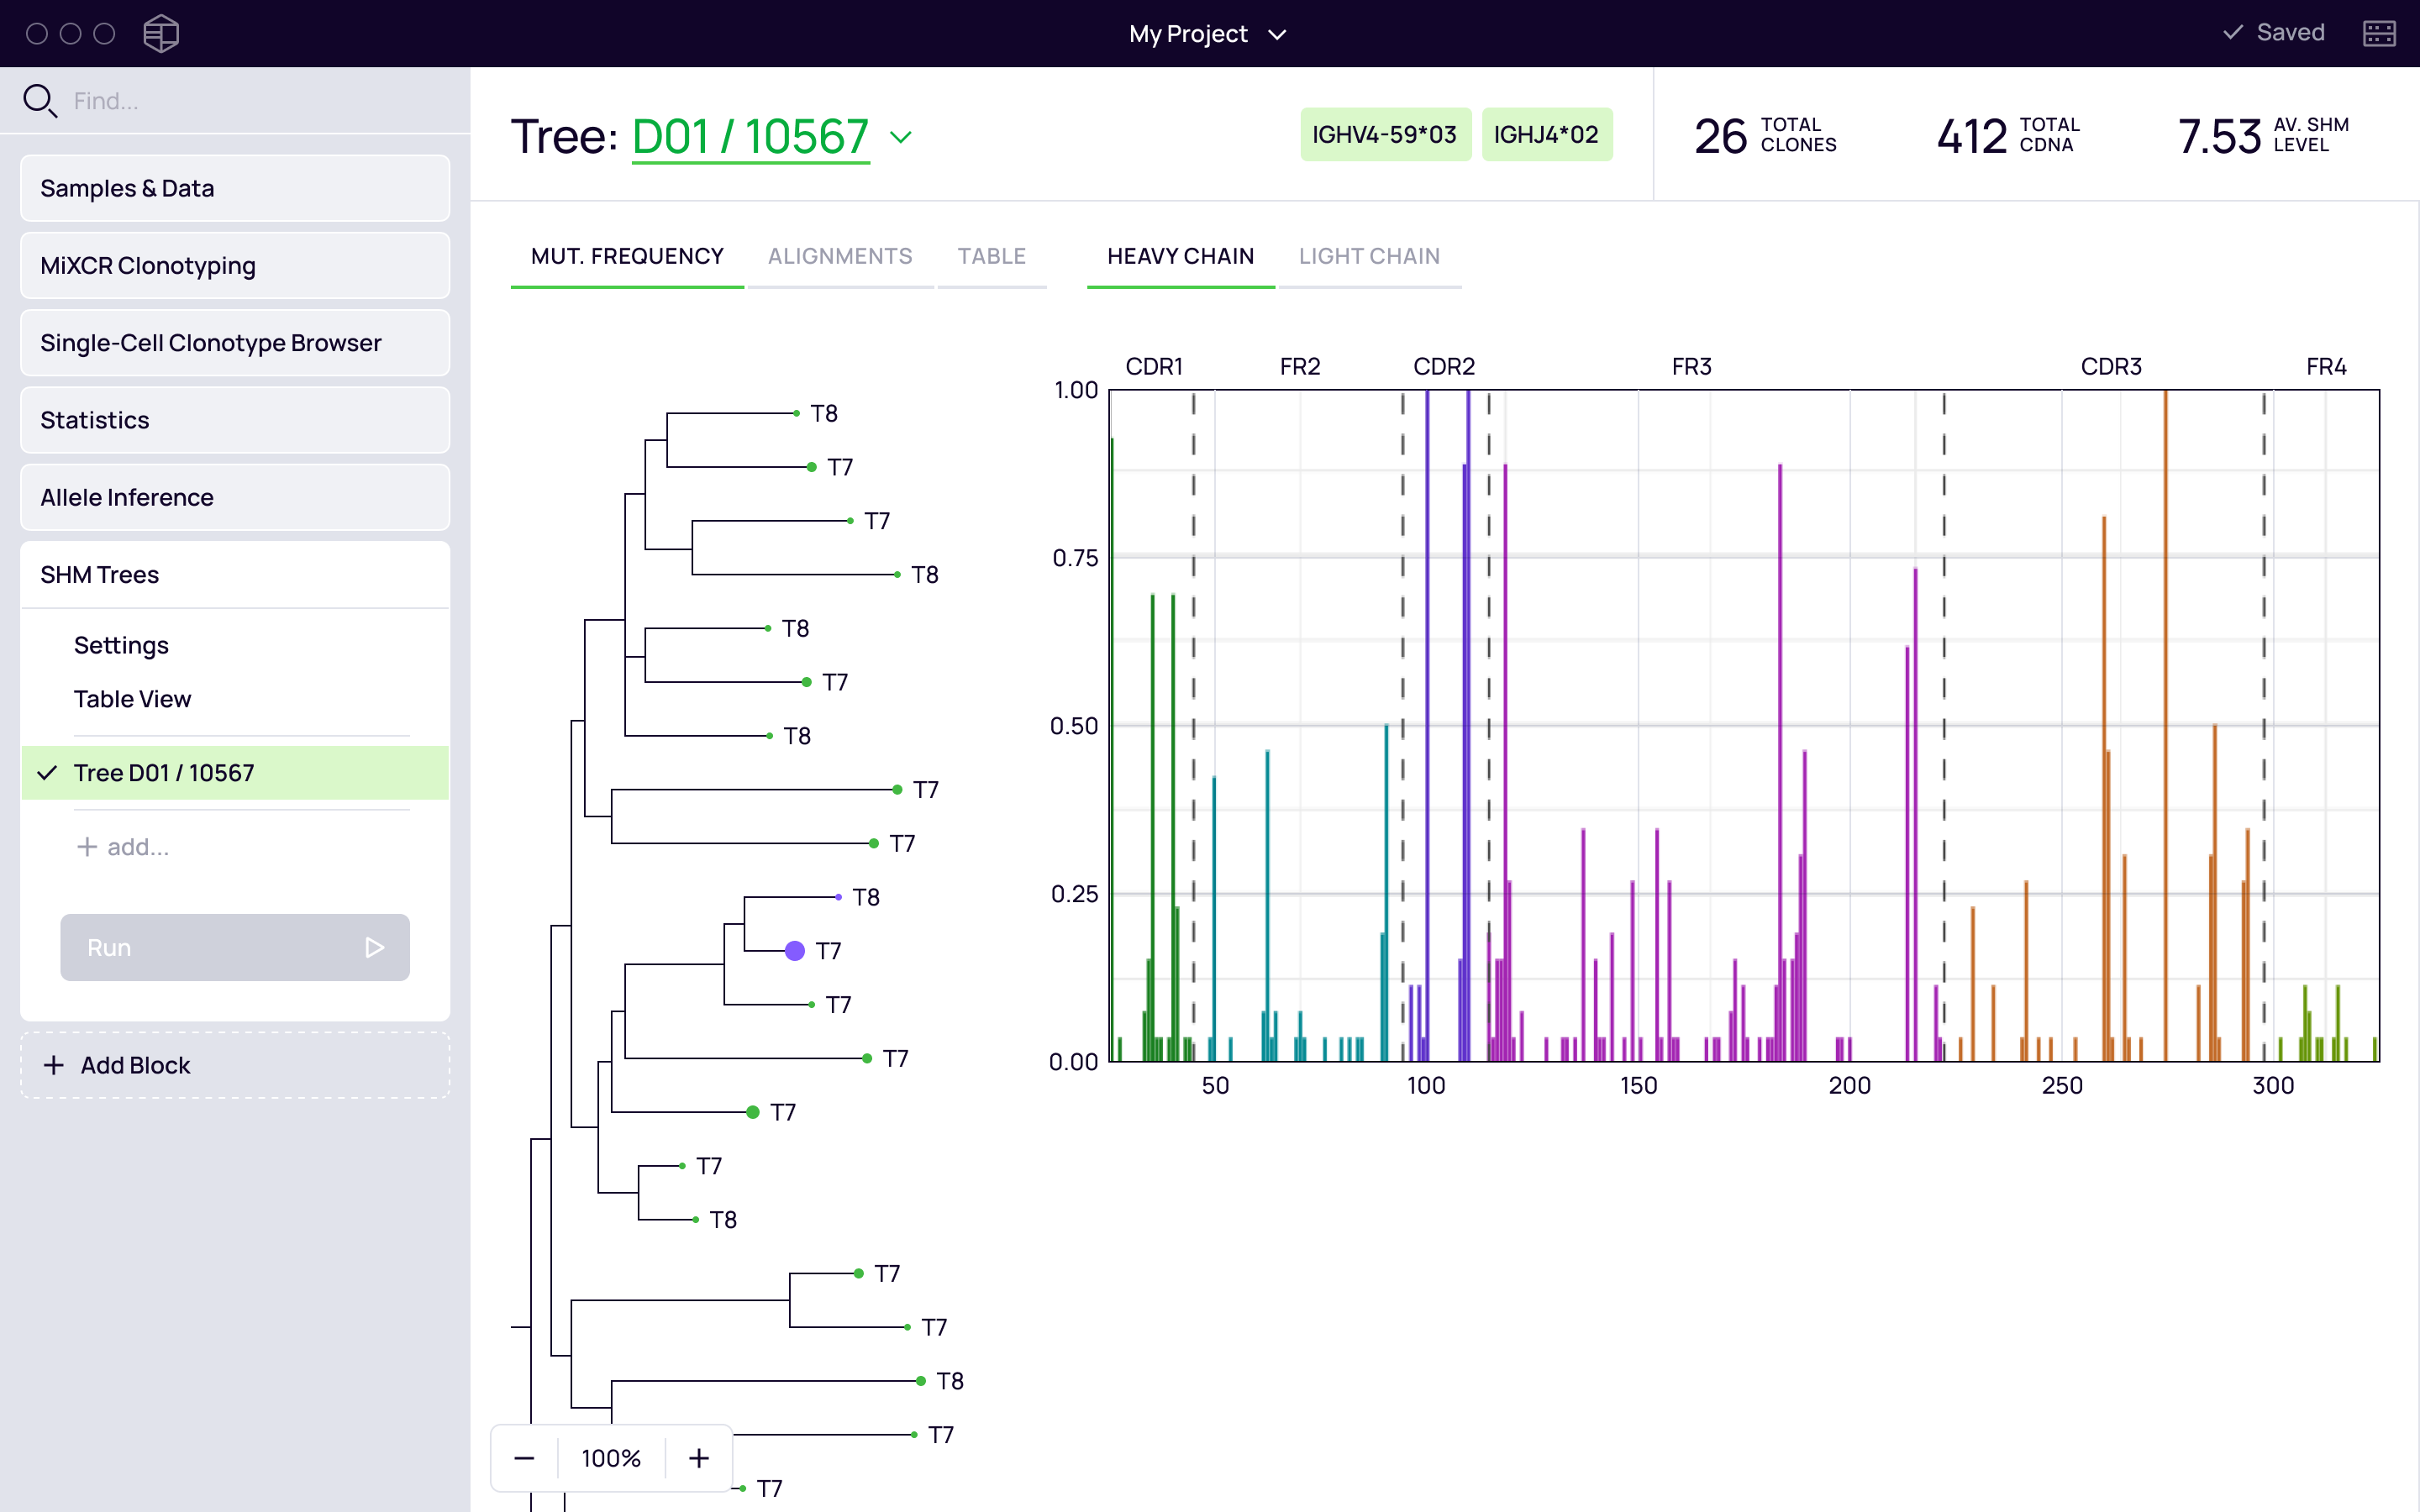 Lineage trees illustrate the microevolution of B cell immunoglobulin genes. In these trees, each node represents a BCR sequence that has undergone mutation in the germinal center, providing a visual narrative of the B cell lineage's genetic changes over time